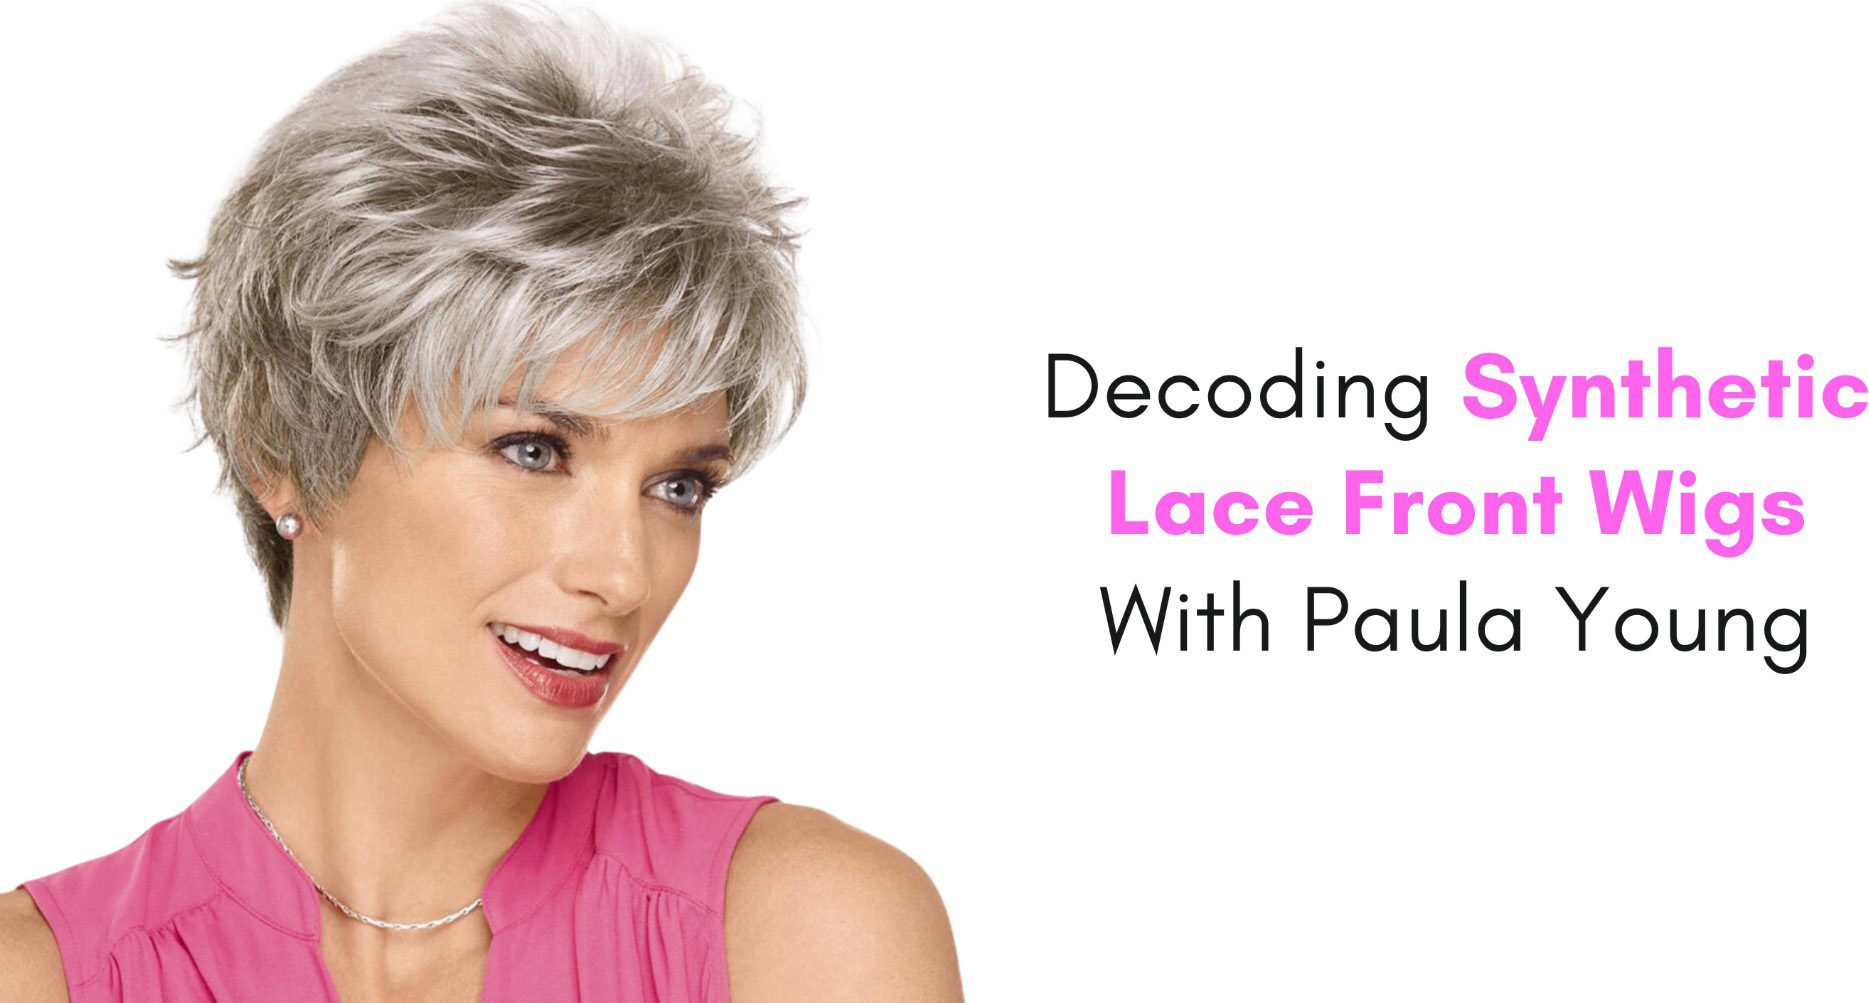 Decoding Synthetic Lace Front Wigs With Paula Young